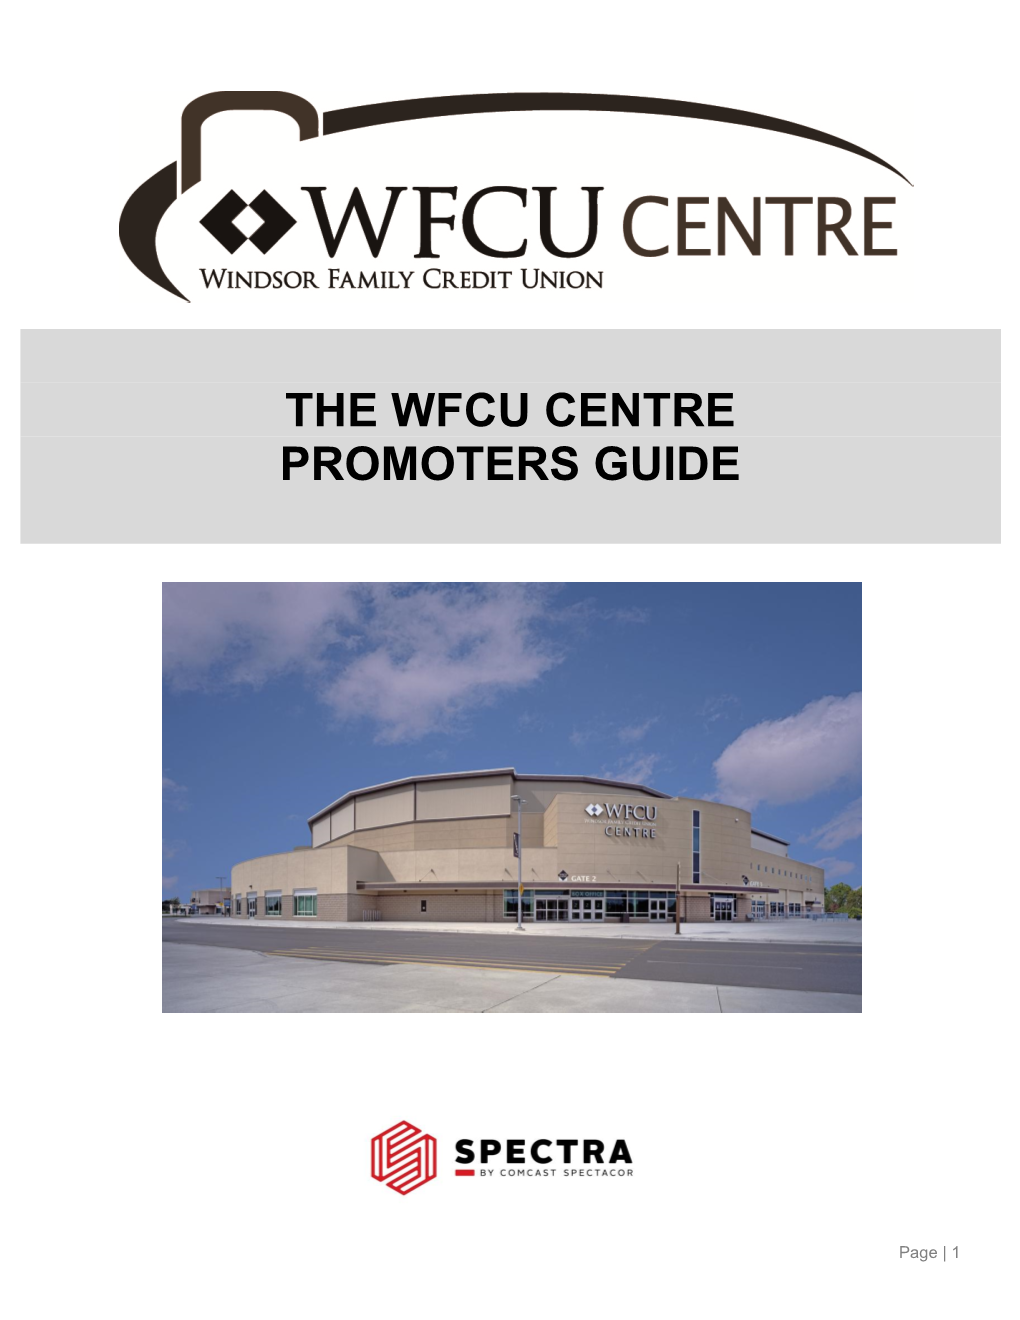 The Wfcu Centre Promoters Guide